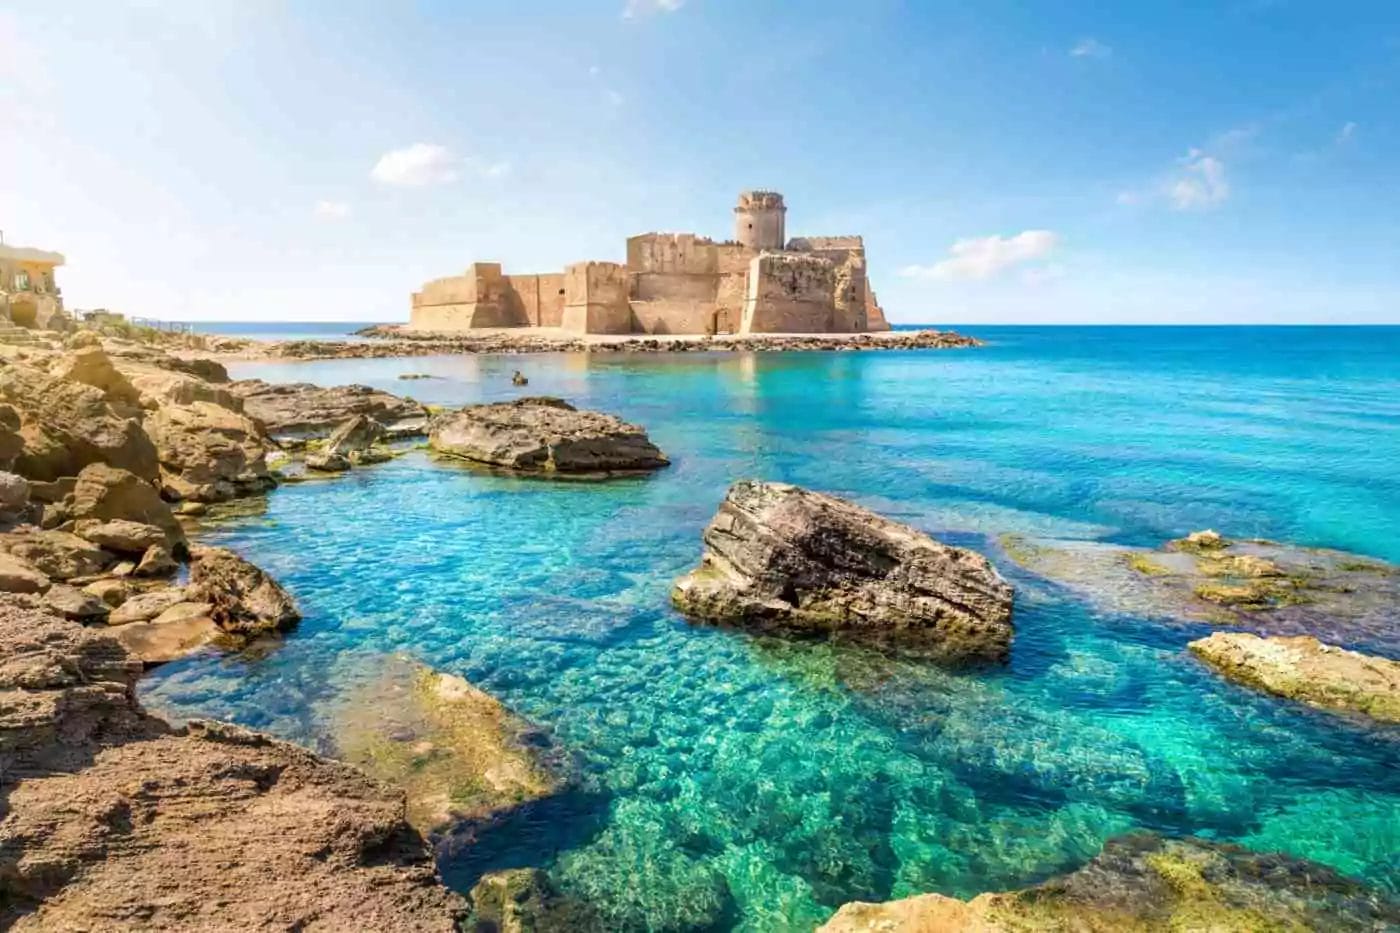 a peninsula with a beautiful castle surrounded by marvelous turquoise sea waters in Le Castella beach in Calabria, Italy